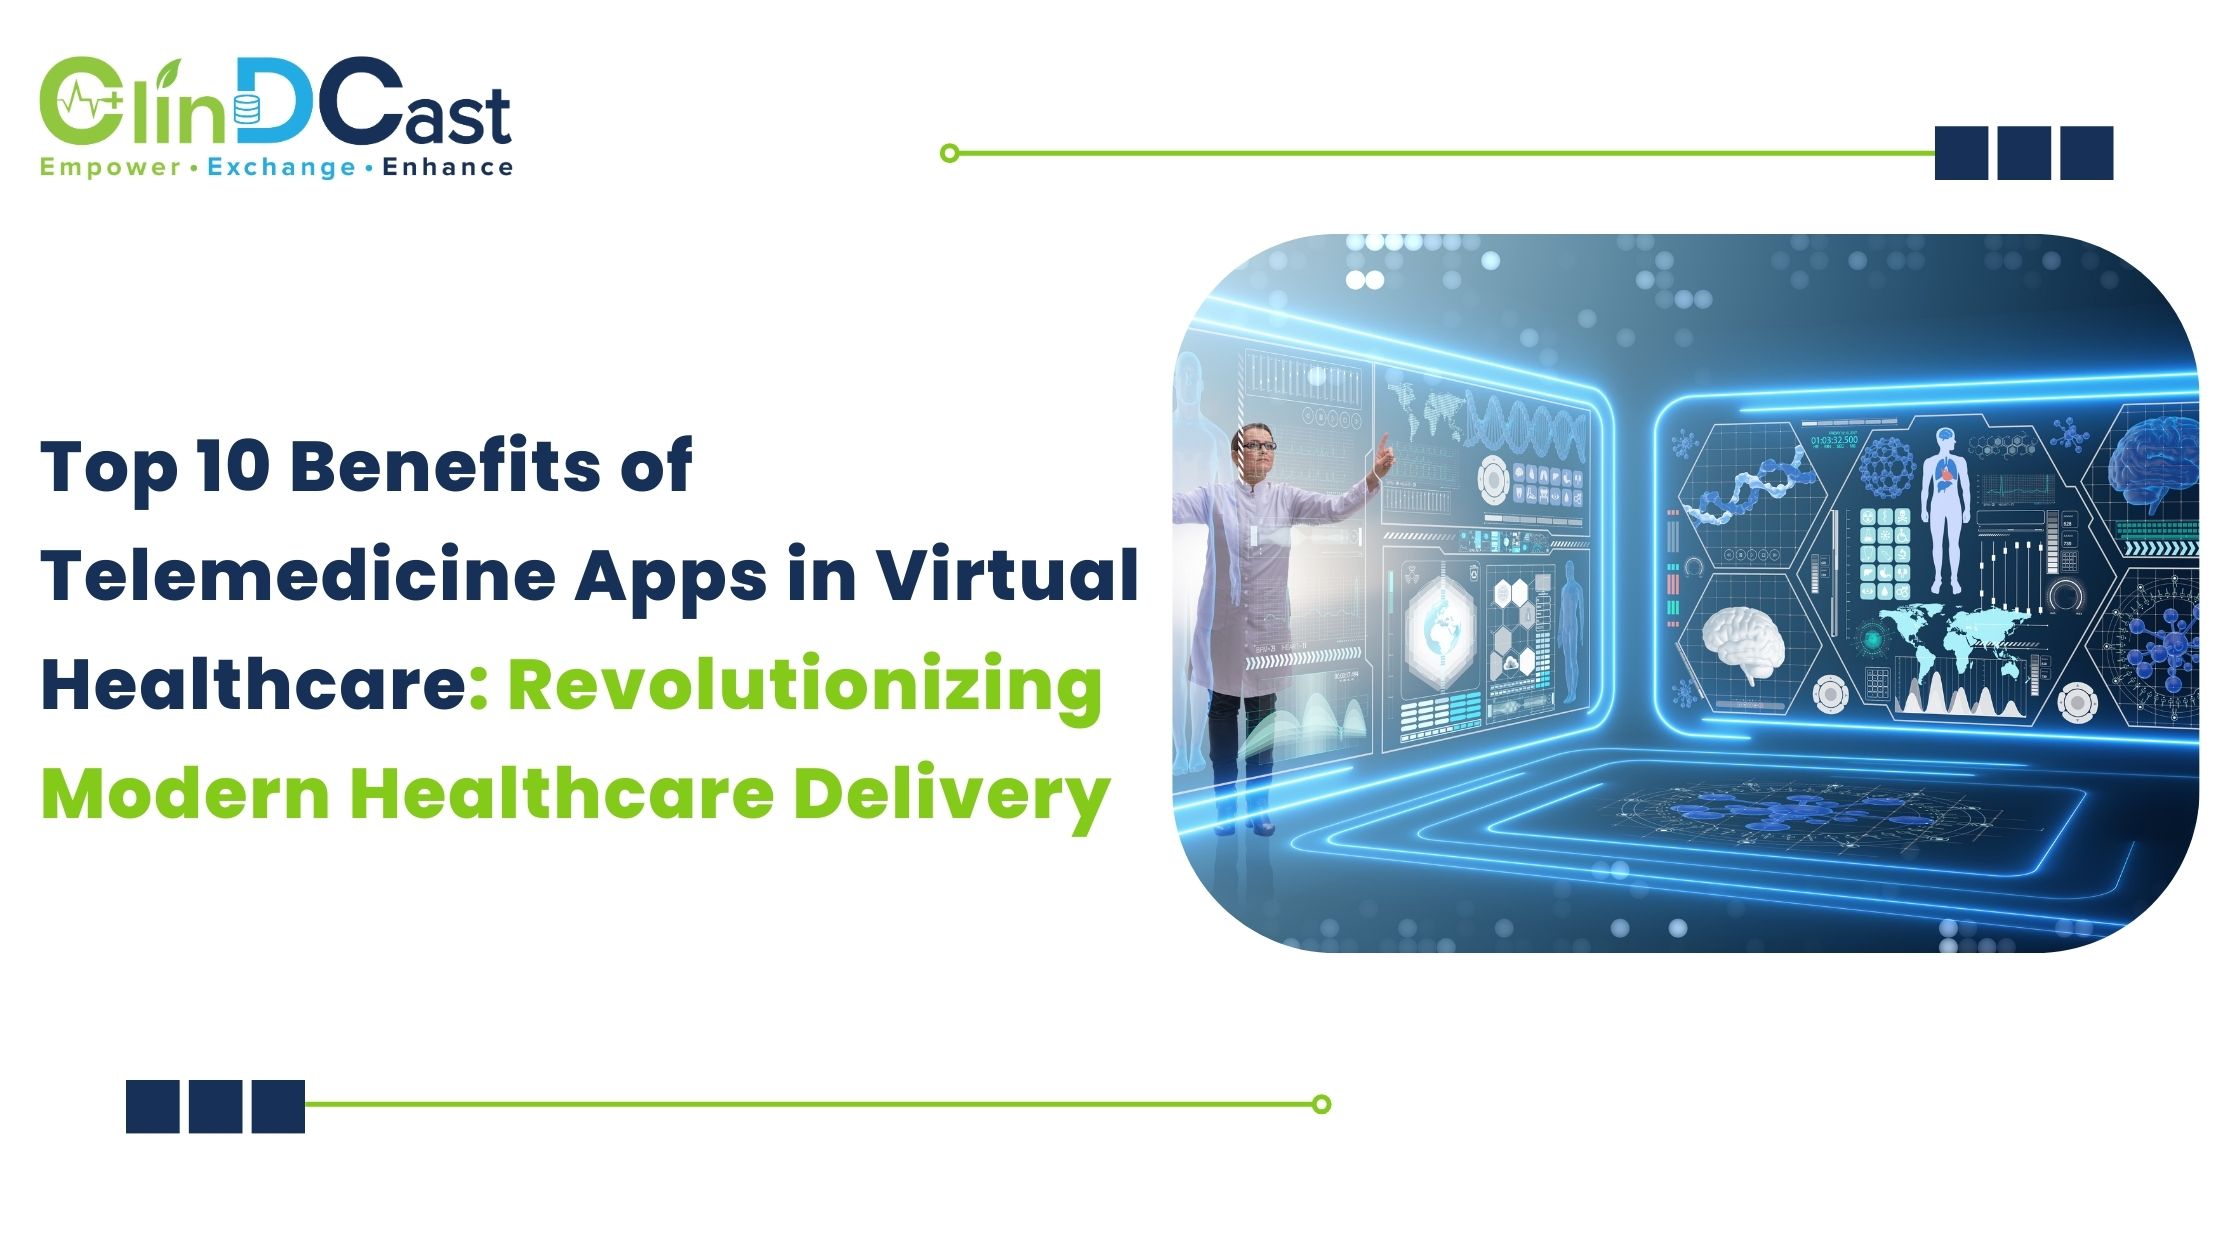 Top 10 Benefits of Telemedicine Apps in Virtual Healthcare: Revolutionizing Modern Healthcare Delivery